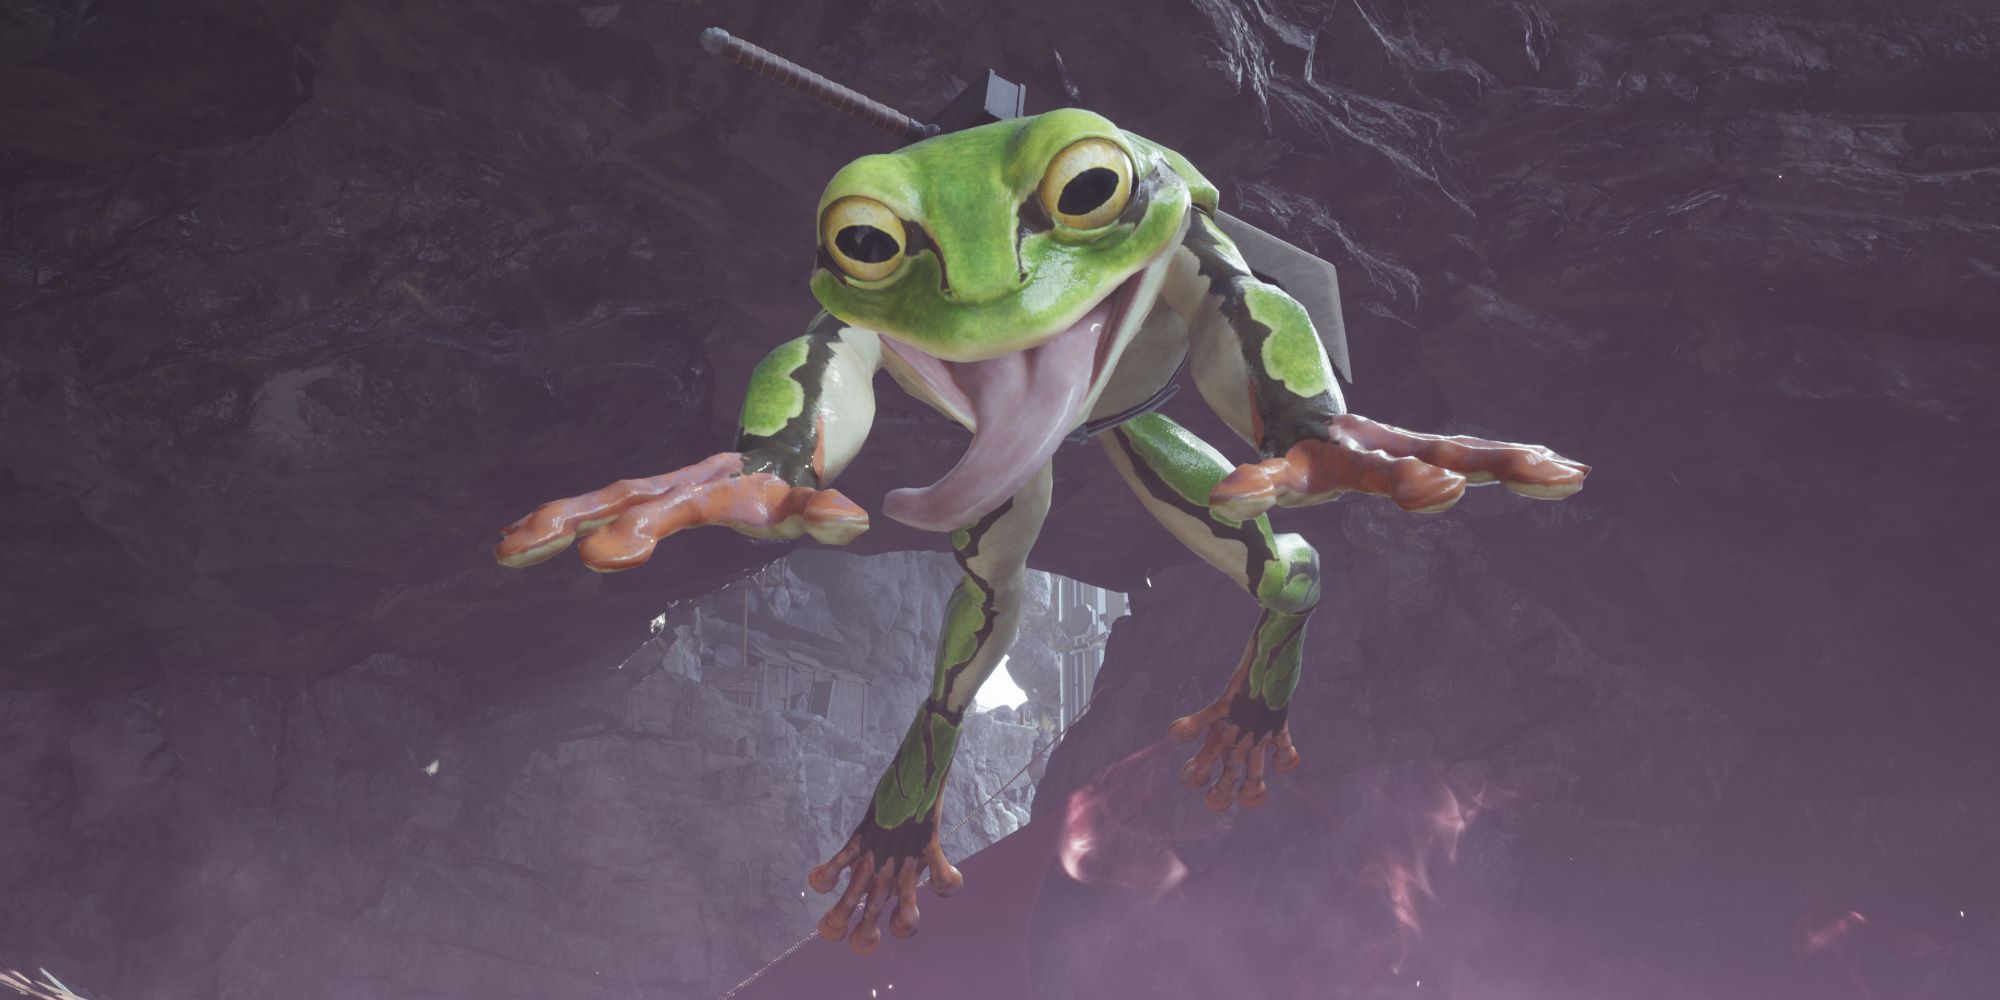 The Frogs Have Final Fantasy 7 Rebirth's Minigame